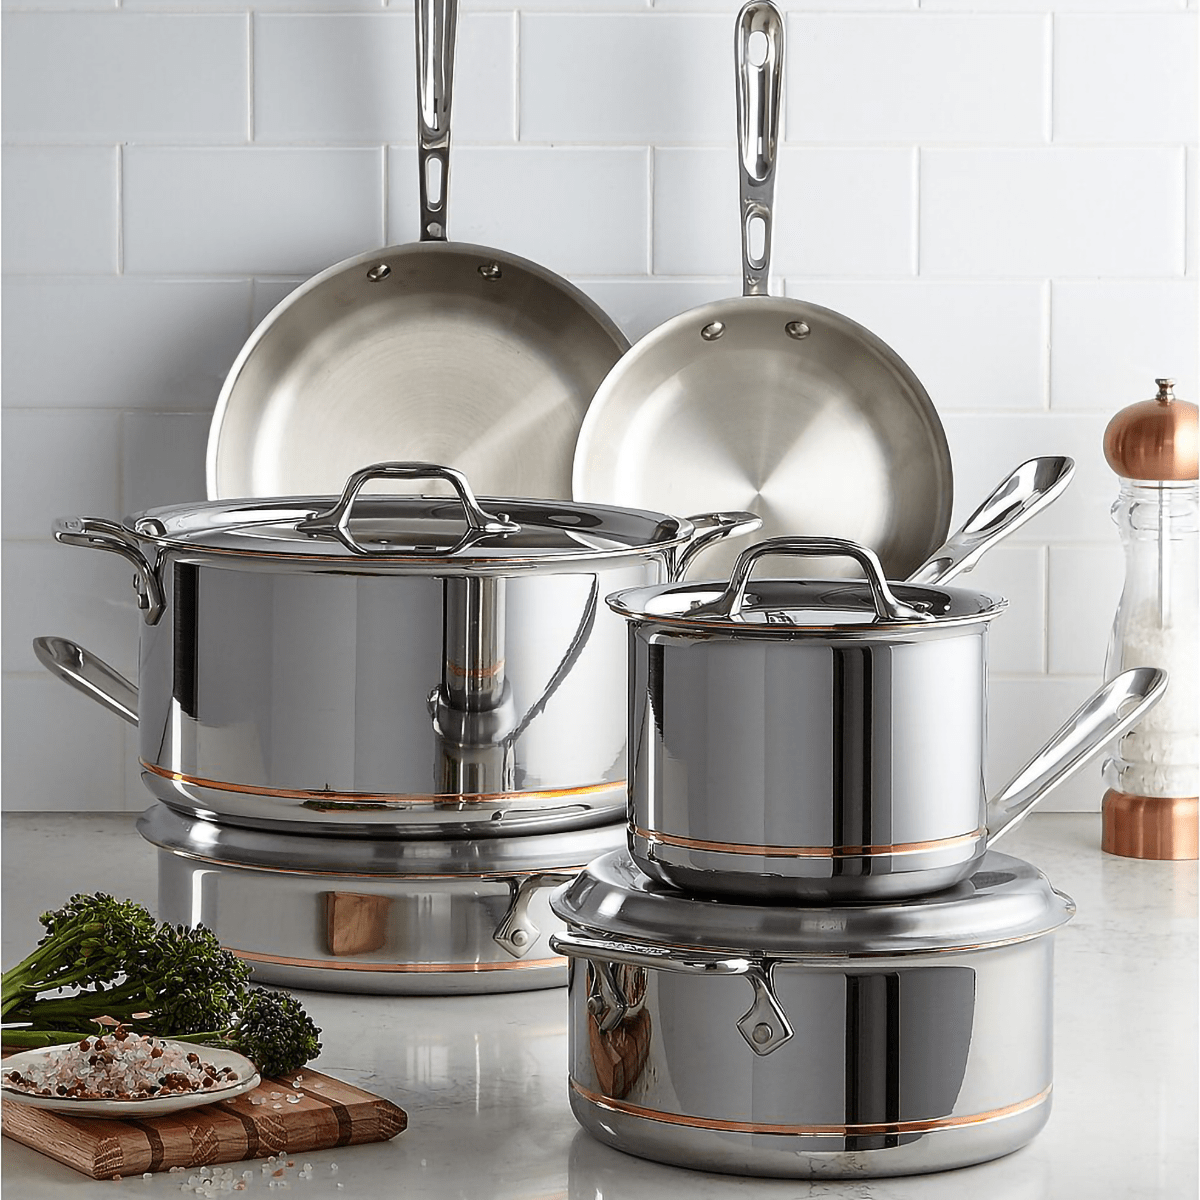 All-Clad Copper Core 14-Piece Stainless Steel Cookware Set